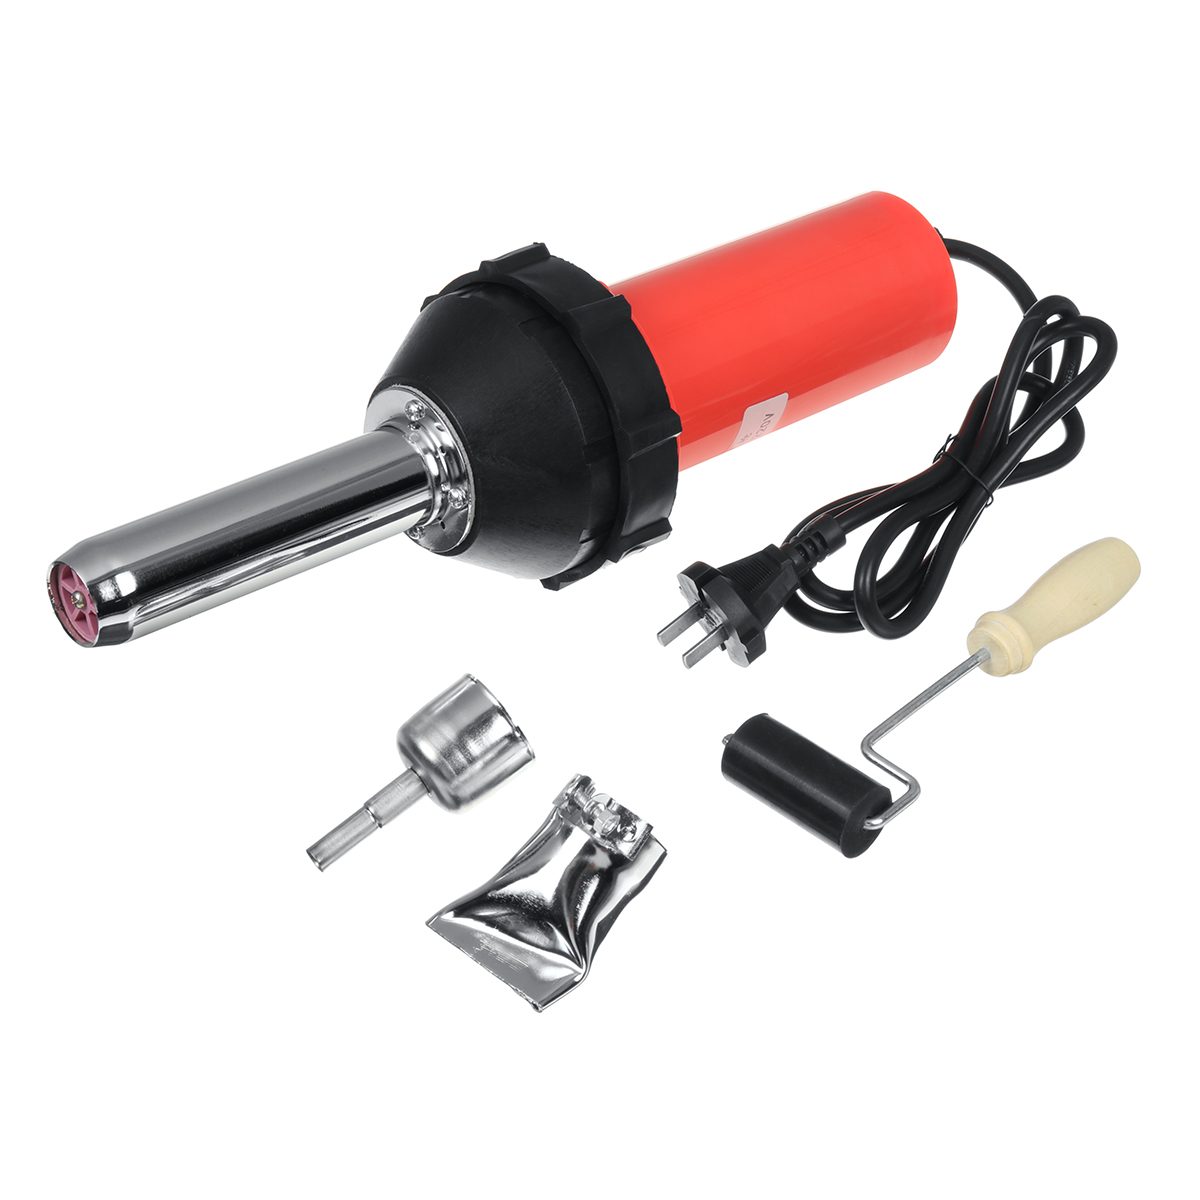 1080W-Plastic-Hot-Air-Welding-Tool-Welder-Torch-with-2Pcs-Nozzles--Roller--Adapter-1558534-3